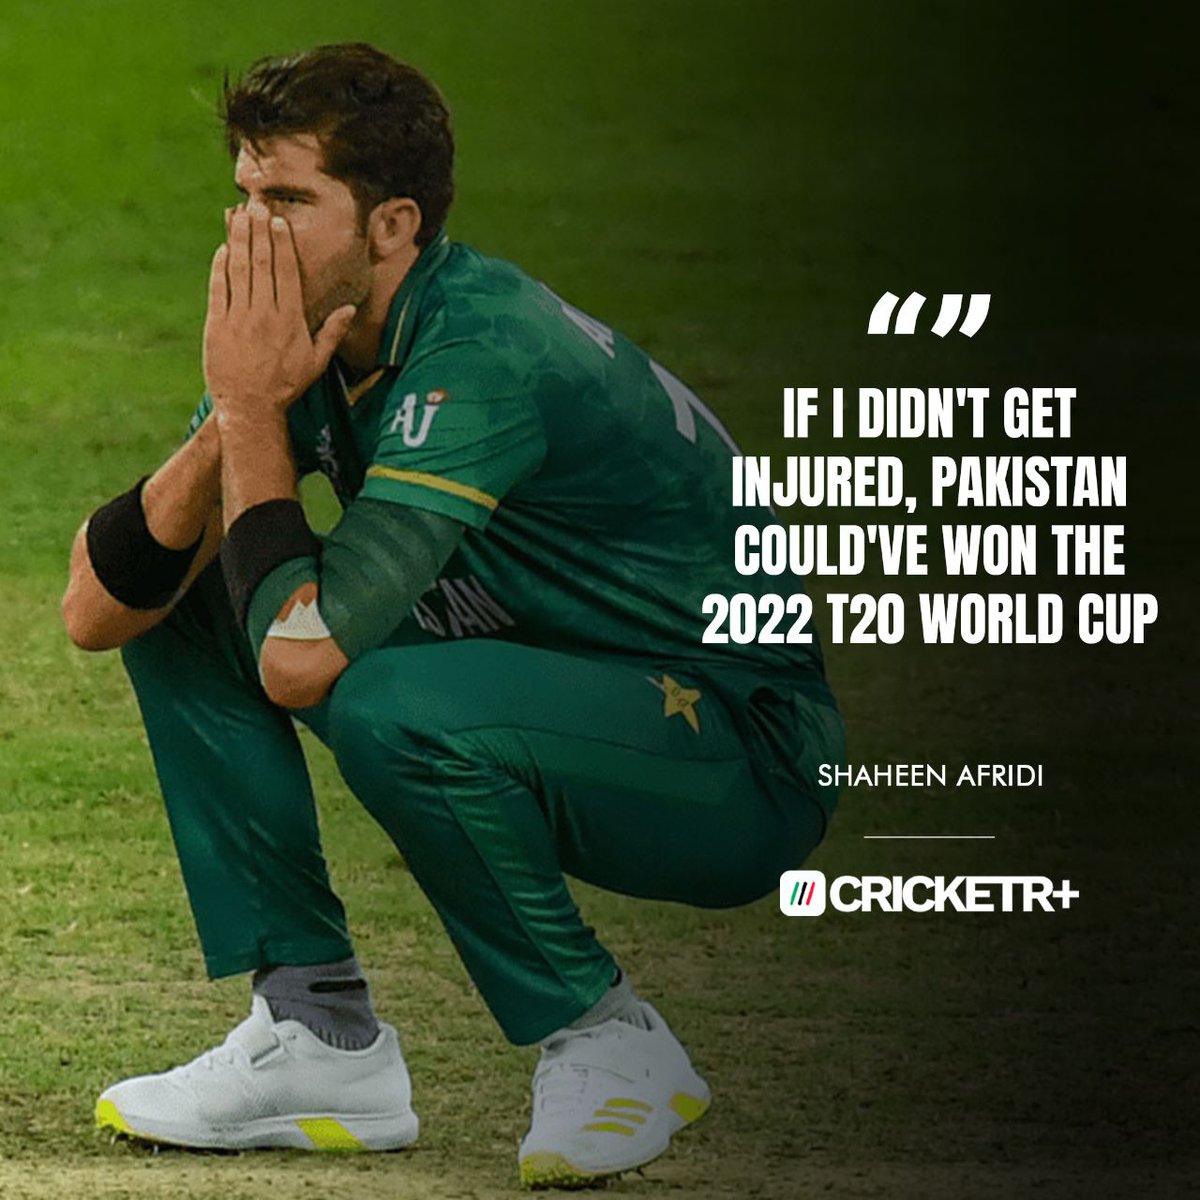 🦅

You agree with Shaheen's statement? 

#CricketR